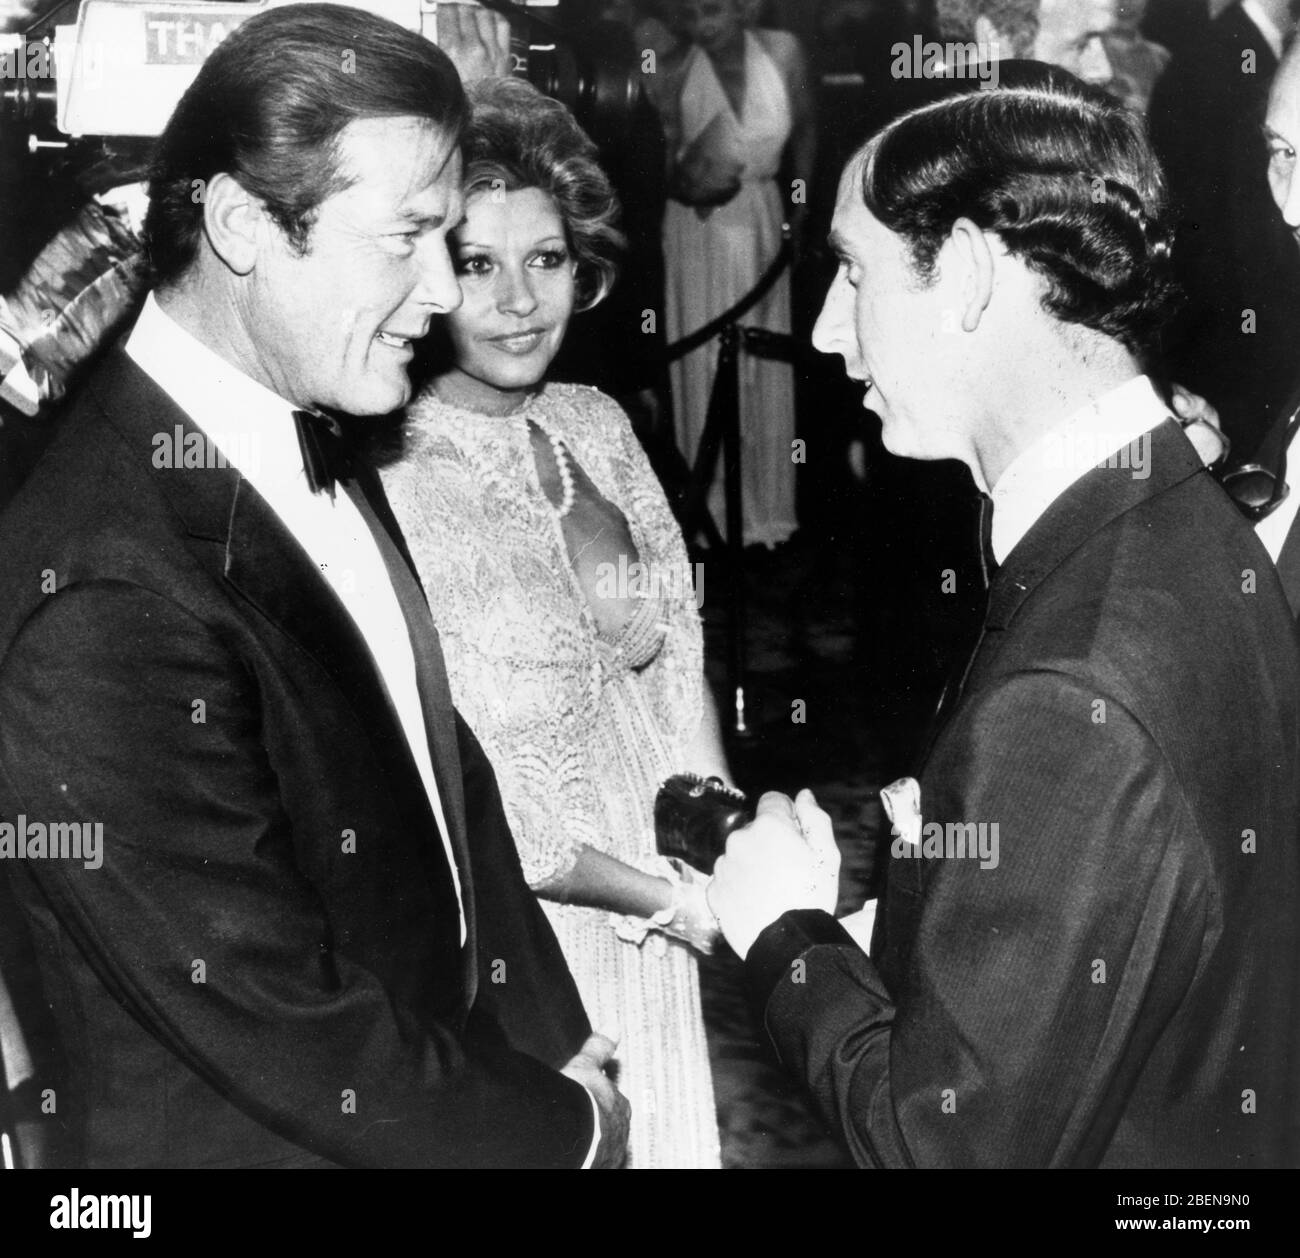 June 25, 1981 - London, England, U.K. - PRINCE CHARLES, right, chats with actor ROGER MOORE, left, and wife LUISA at the premiere of the James Bond film, 'For Your Eyes Only.'  (Credit Image: © Keystone Press Agency/Keystone USA via ZUMAPRESS.com) Stock Photo